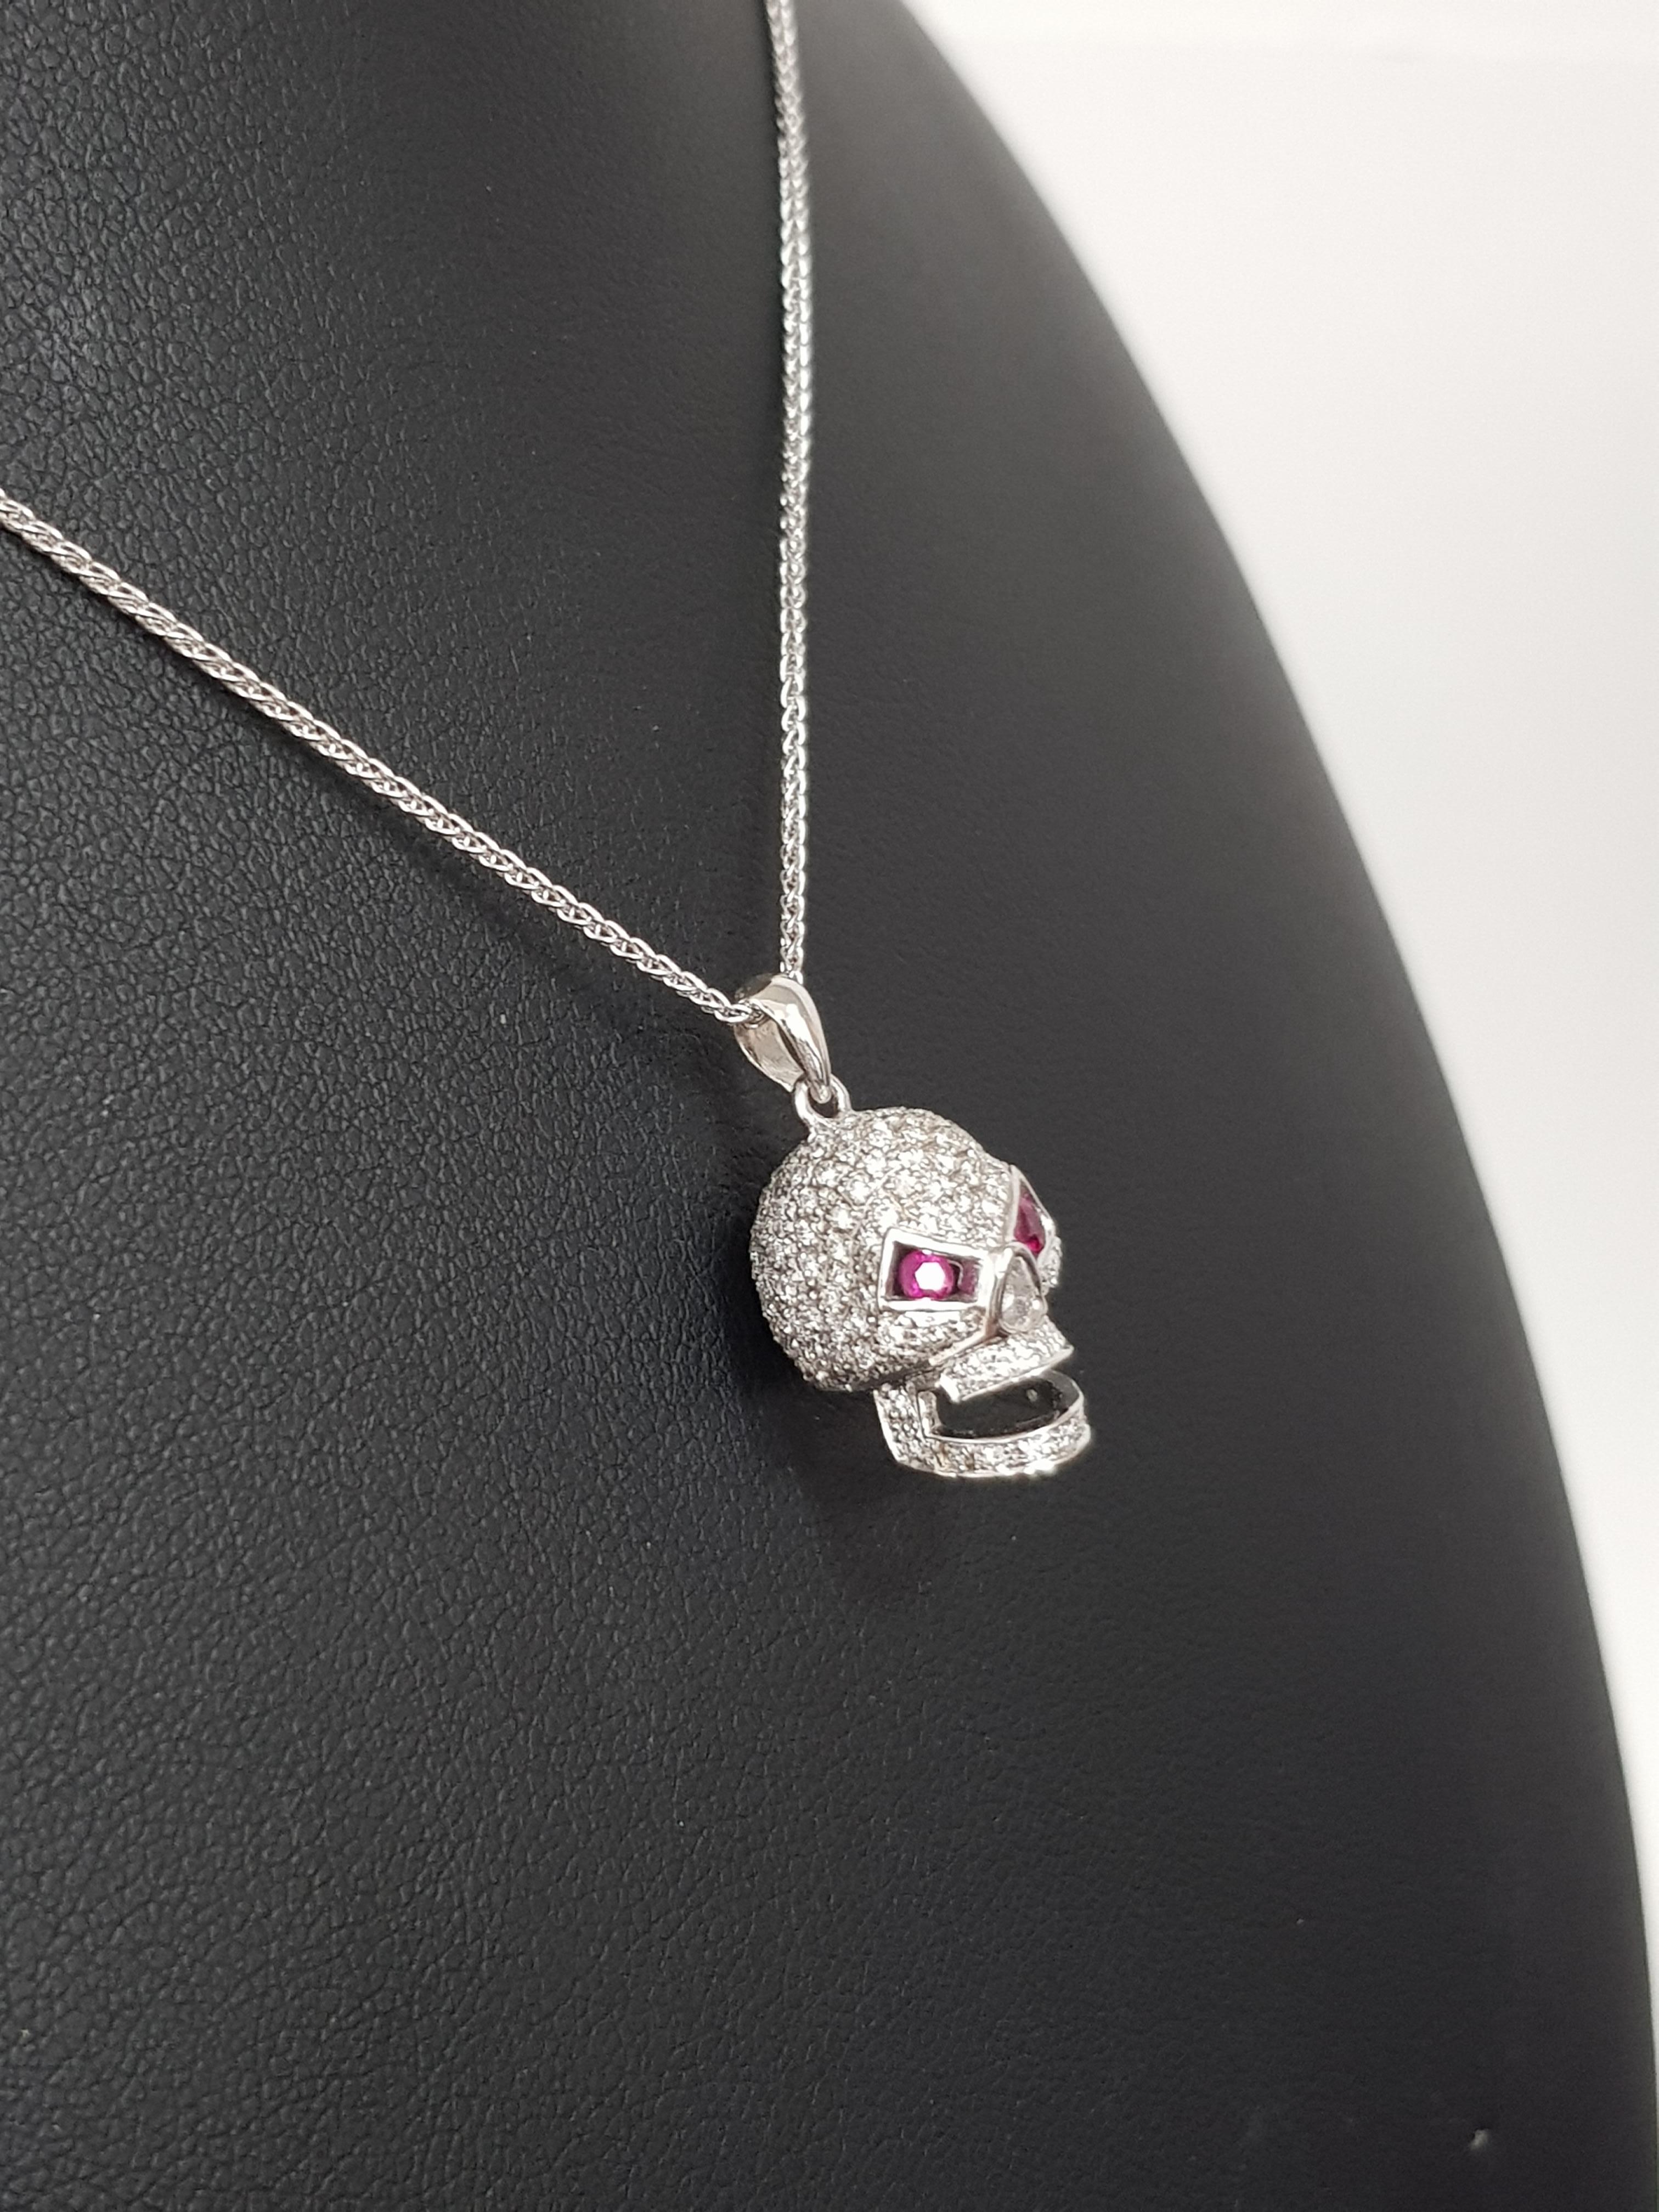 The contemporary and bespoke Skull pendant has a total of 1.00 Carat of White Round Diamonds colour H clarity SI1. A totally unique addition to your jewellery collection. The skull face is crafted with the finest detail to give an outstanding look